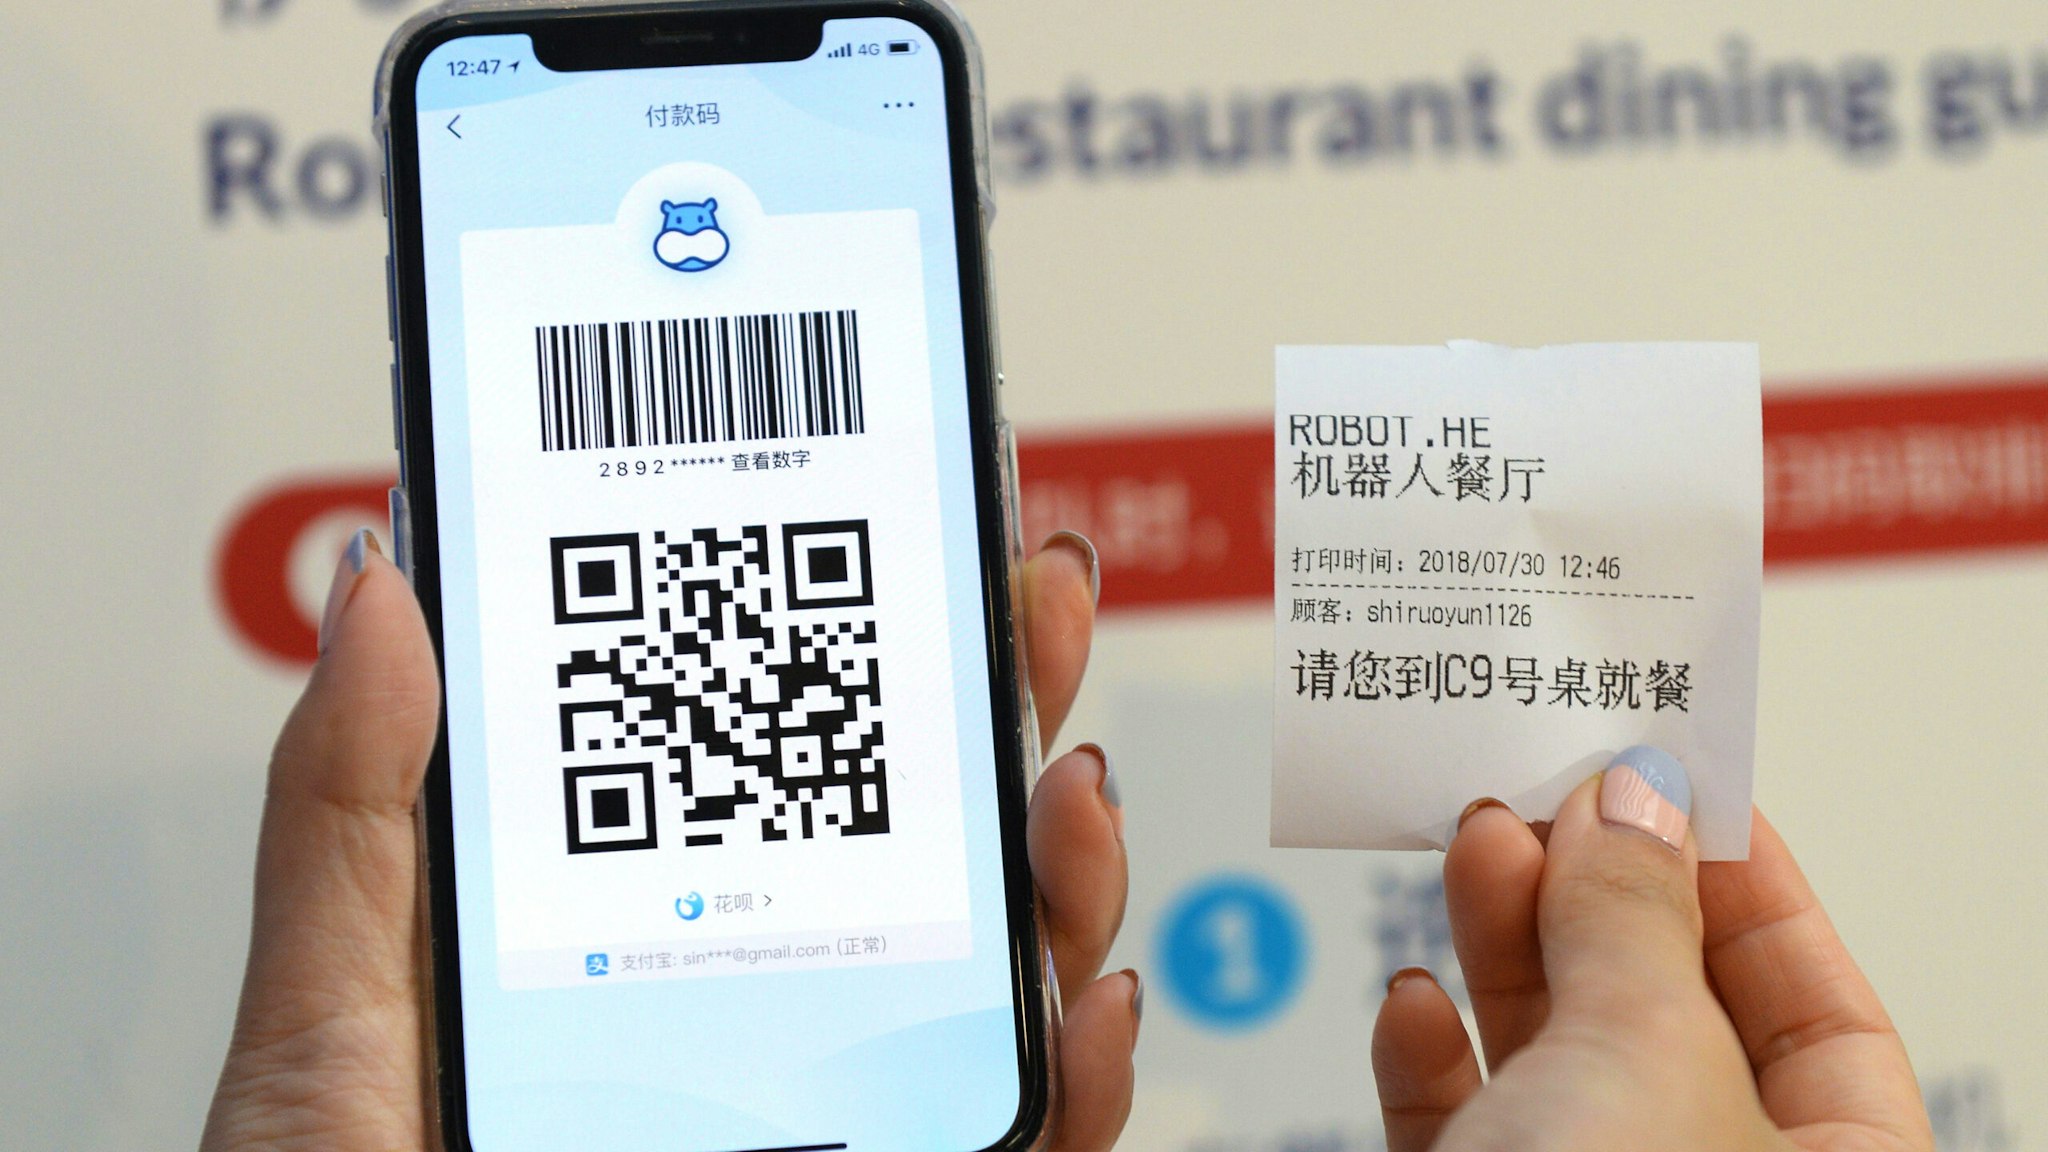 This photo taken on July 30, 2018 shows a QR code for payment on a smartphone and a receipt with booking information at the ROBOT.HE restaurant in Shanghai. - The little robotic waiter wheels up to the table, raises its glass lid to reveal a steaming plate of local Shanghai-style crayfish and announces in low, mechanical tones, "Enjoy your meal."